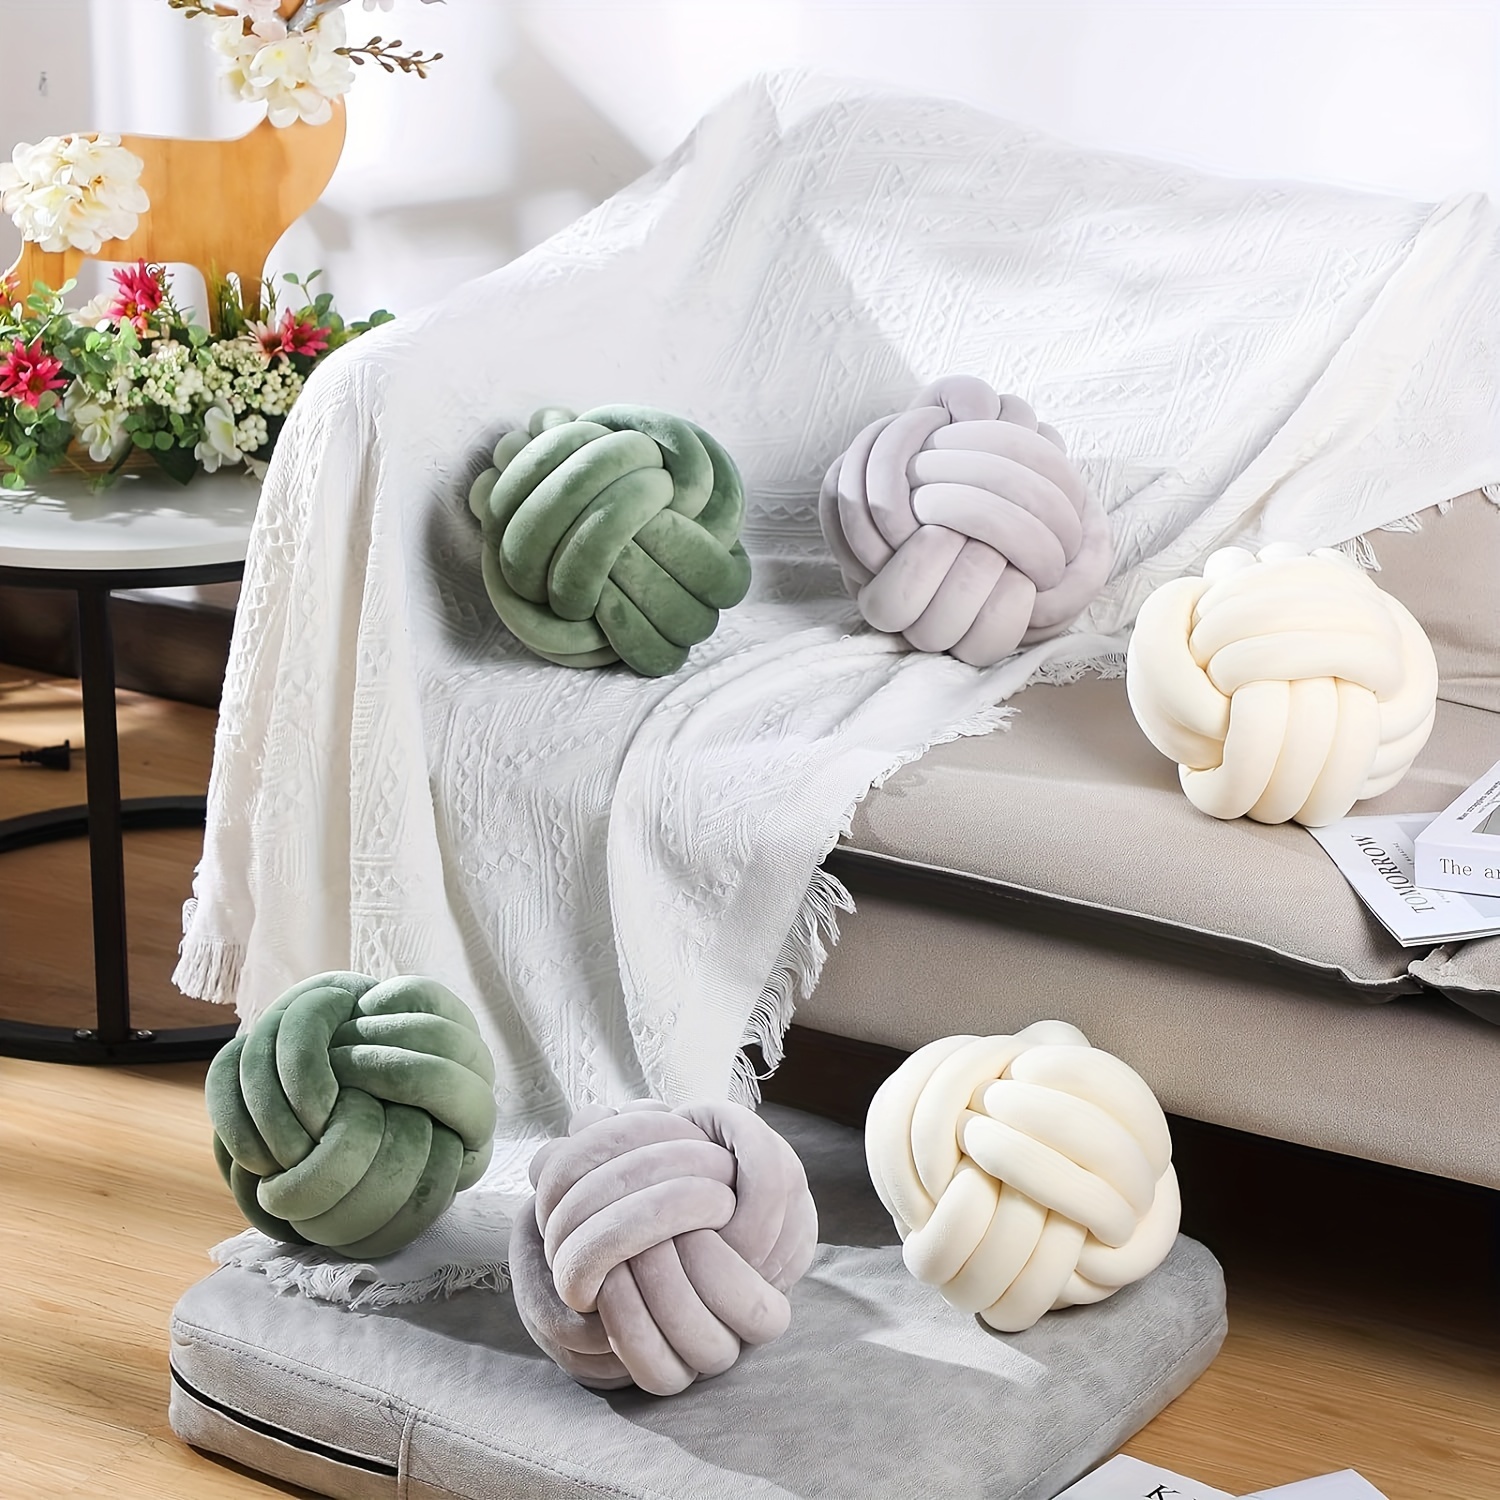 

1pc Small Knot Ball Pillow, Round Plush Aesthetic Cushion Pillow, Soft Cute Decorative Knotted Pillow For Bedroom Sofa Decor